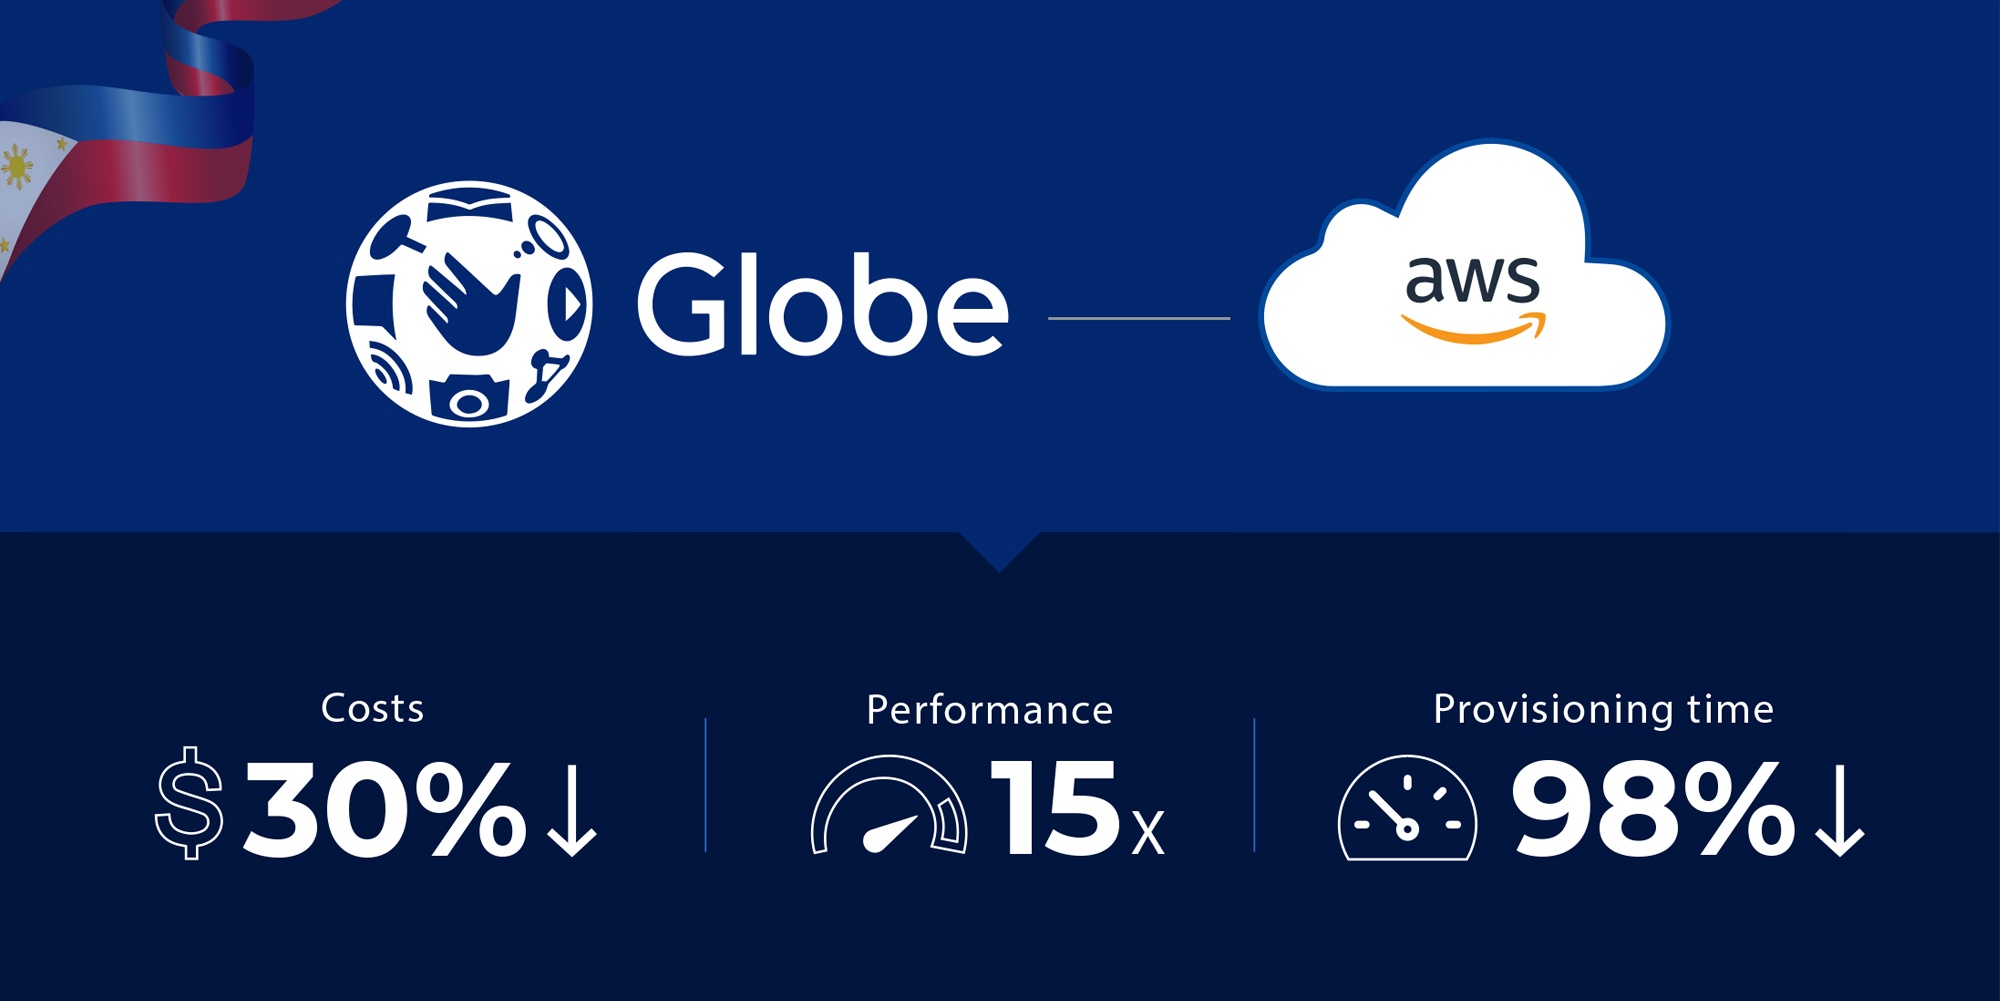 Globe Philippines case study on how cloud has benefitted business